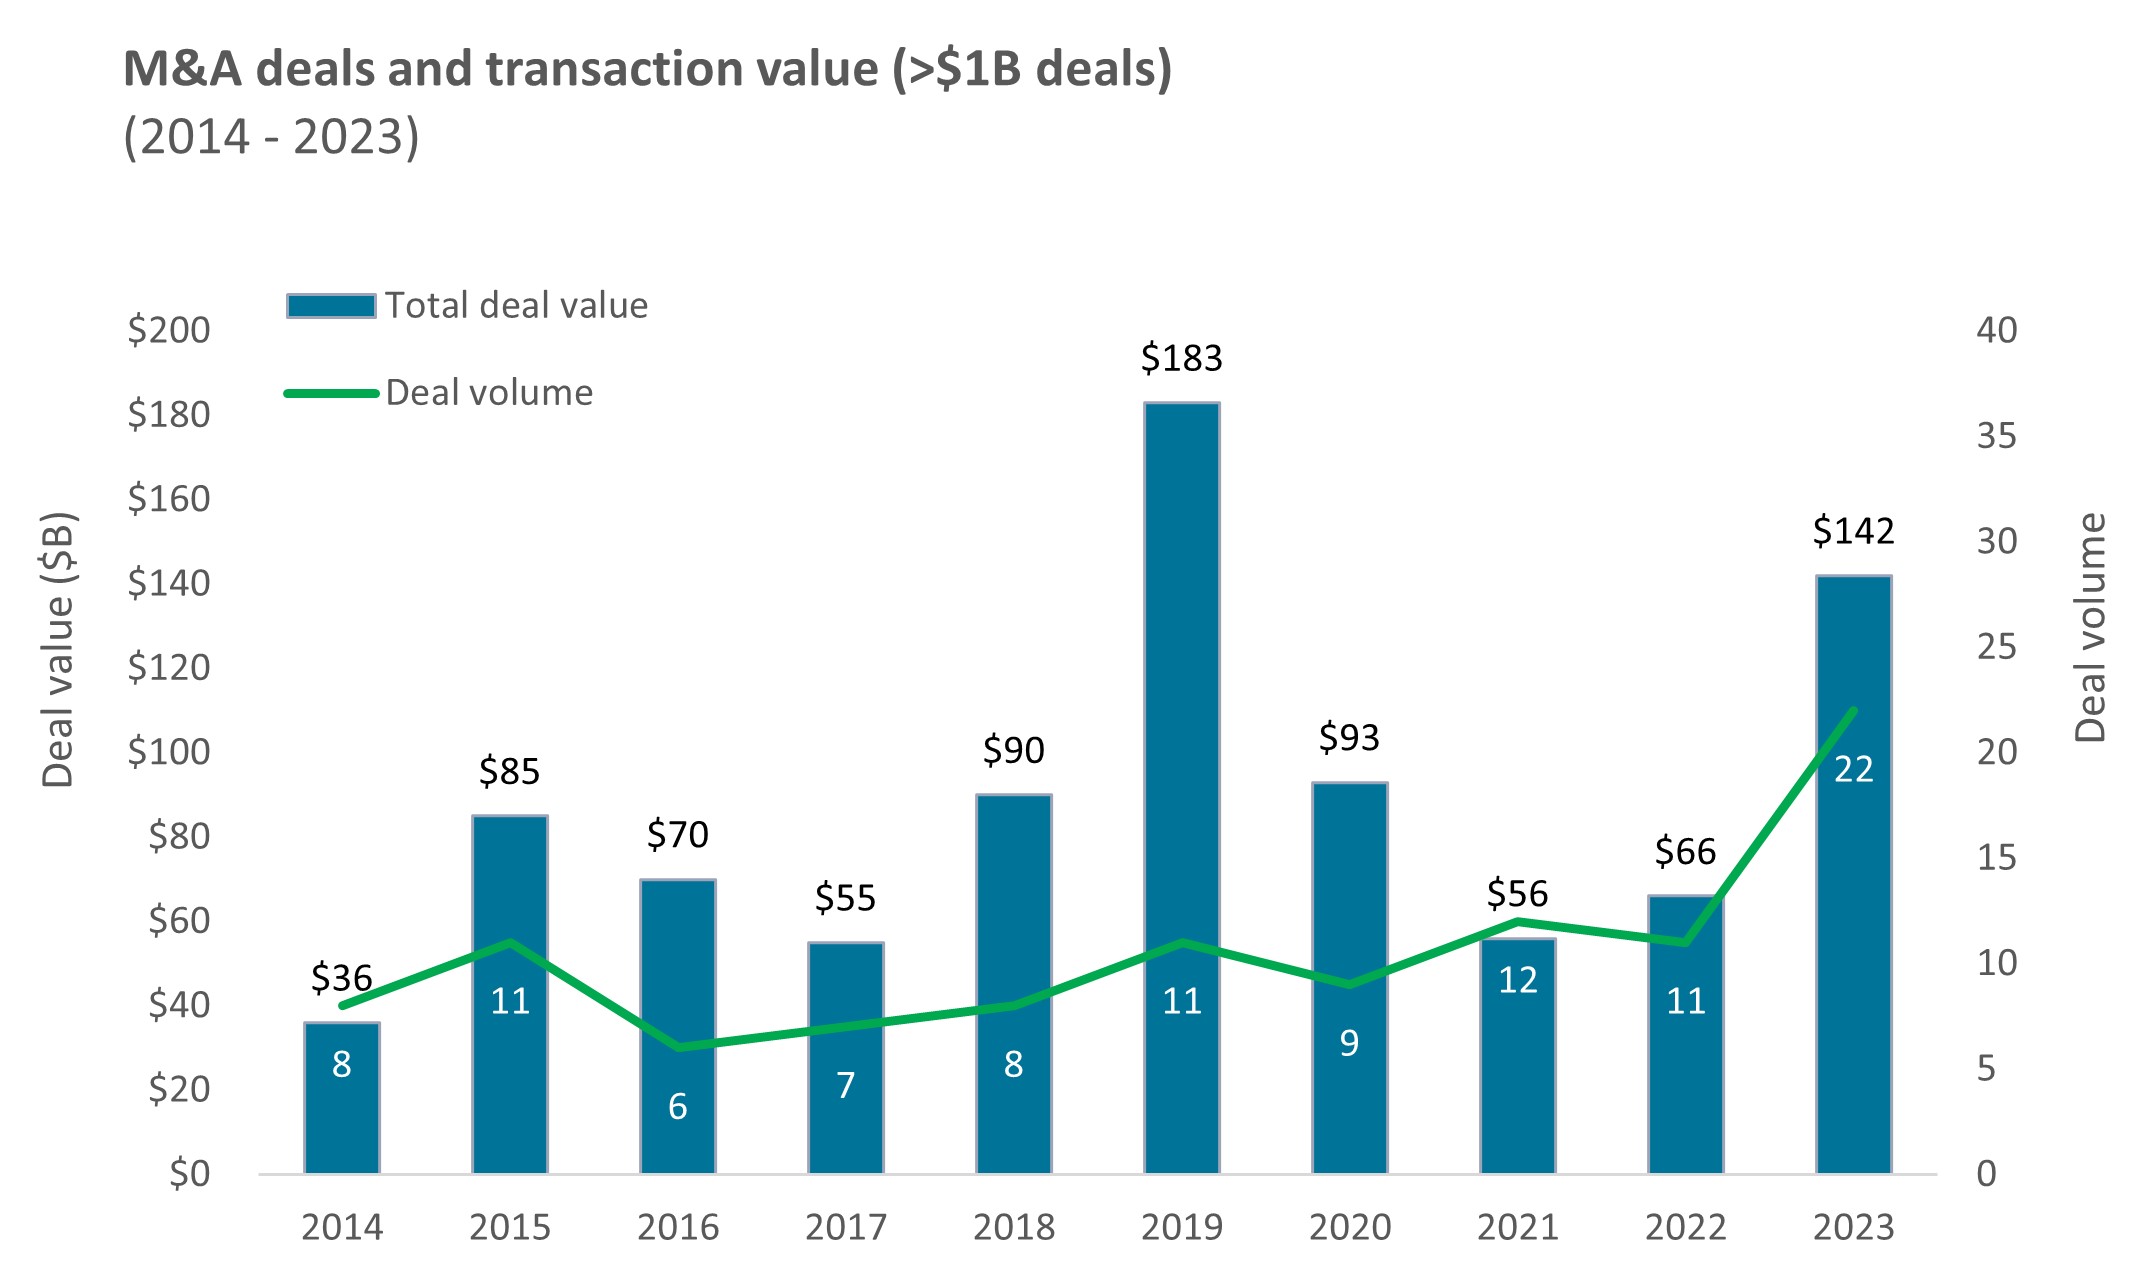 Source: Source: TD Cowen, as of 31 December 2023. Data reflect M&A deals >$1B in transaction value in the biotech sector.